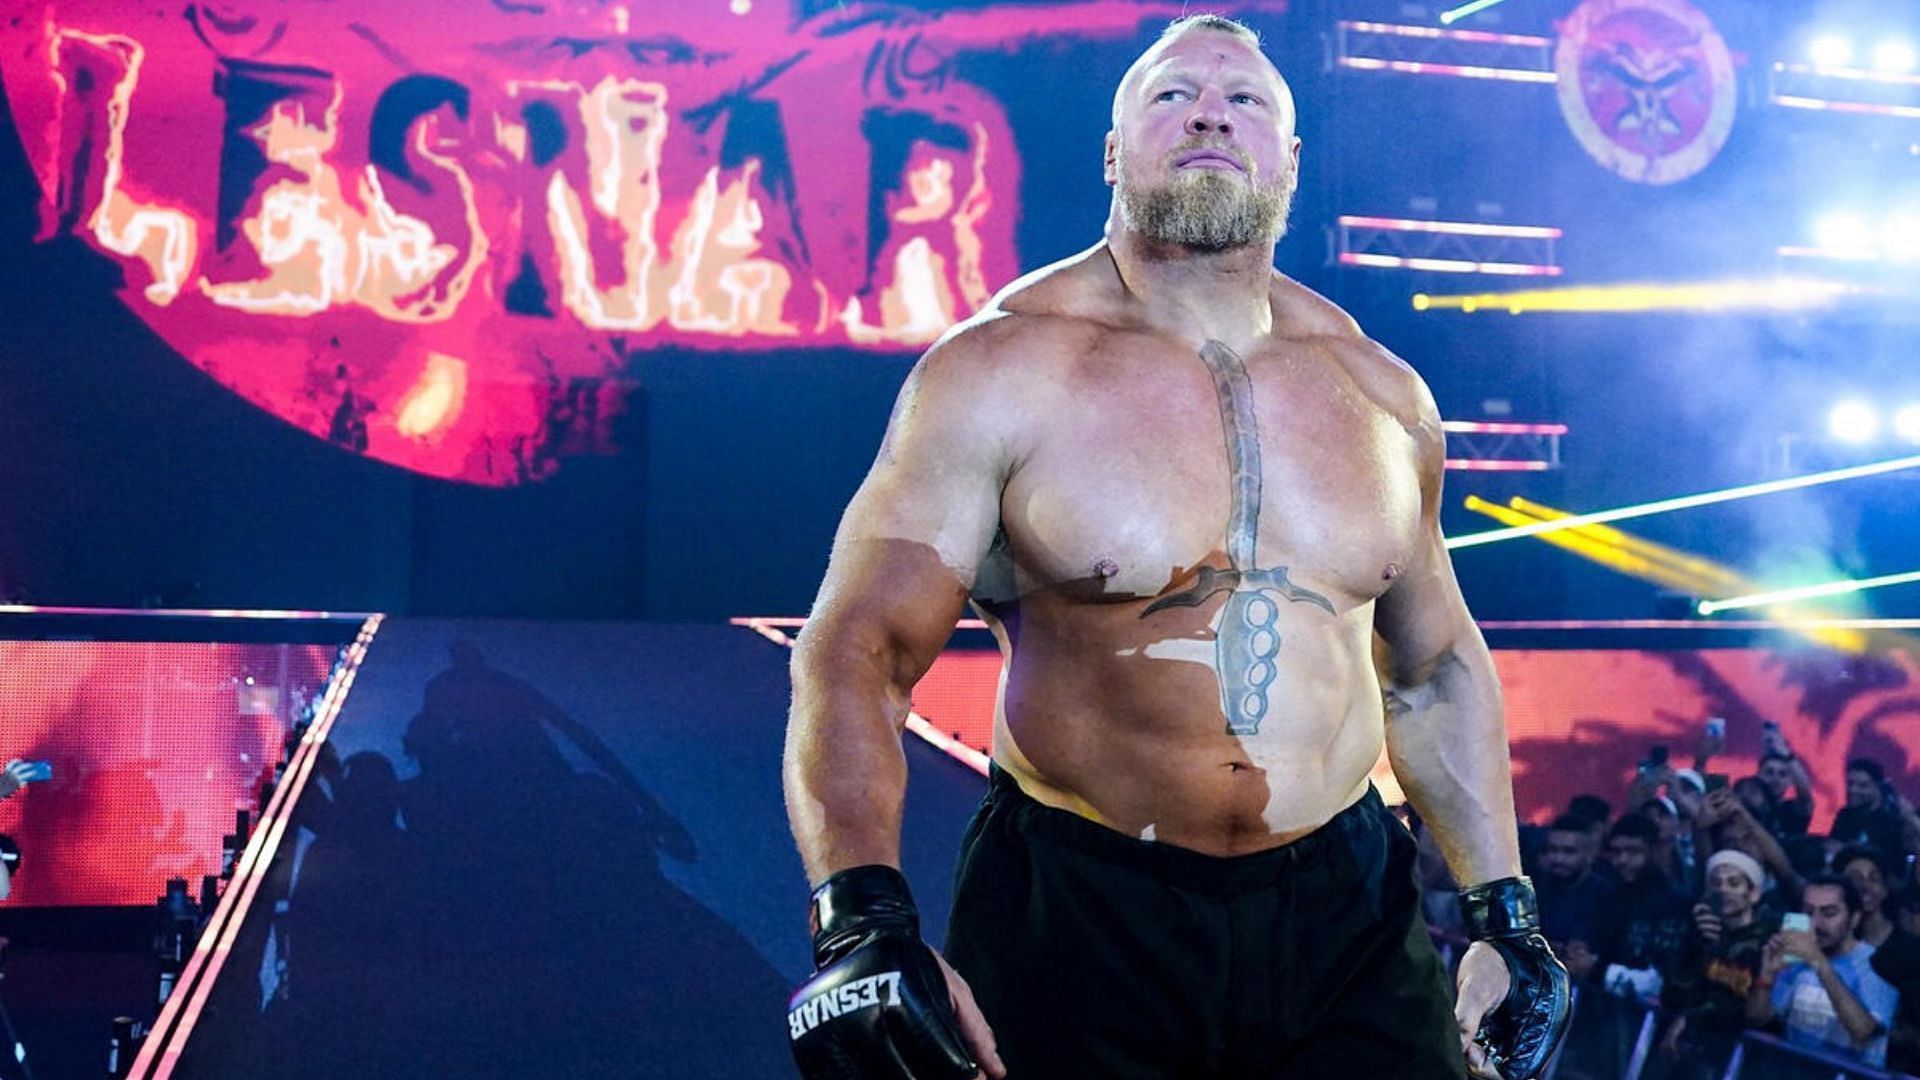 Brock Lesnar has not been seen in WWE for quite a while